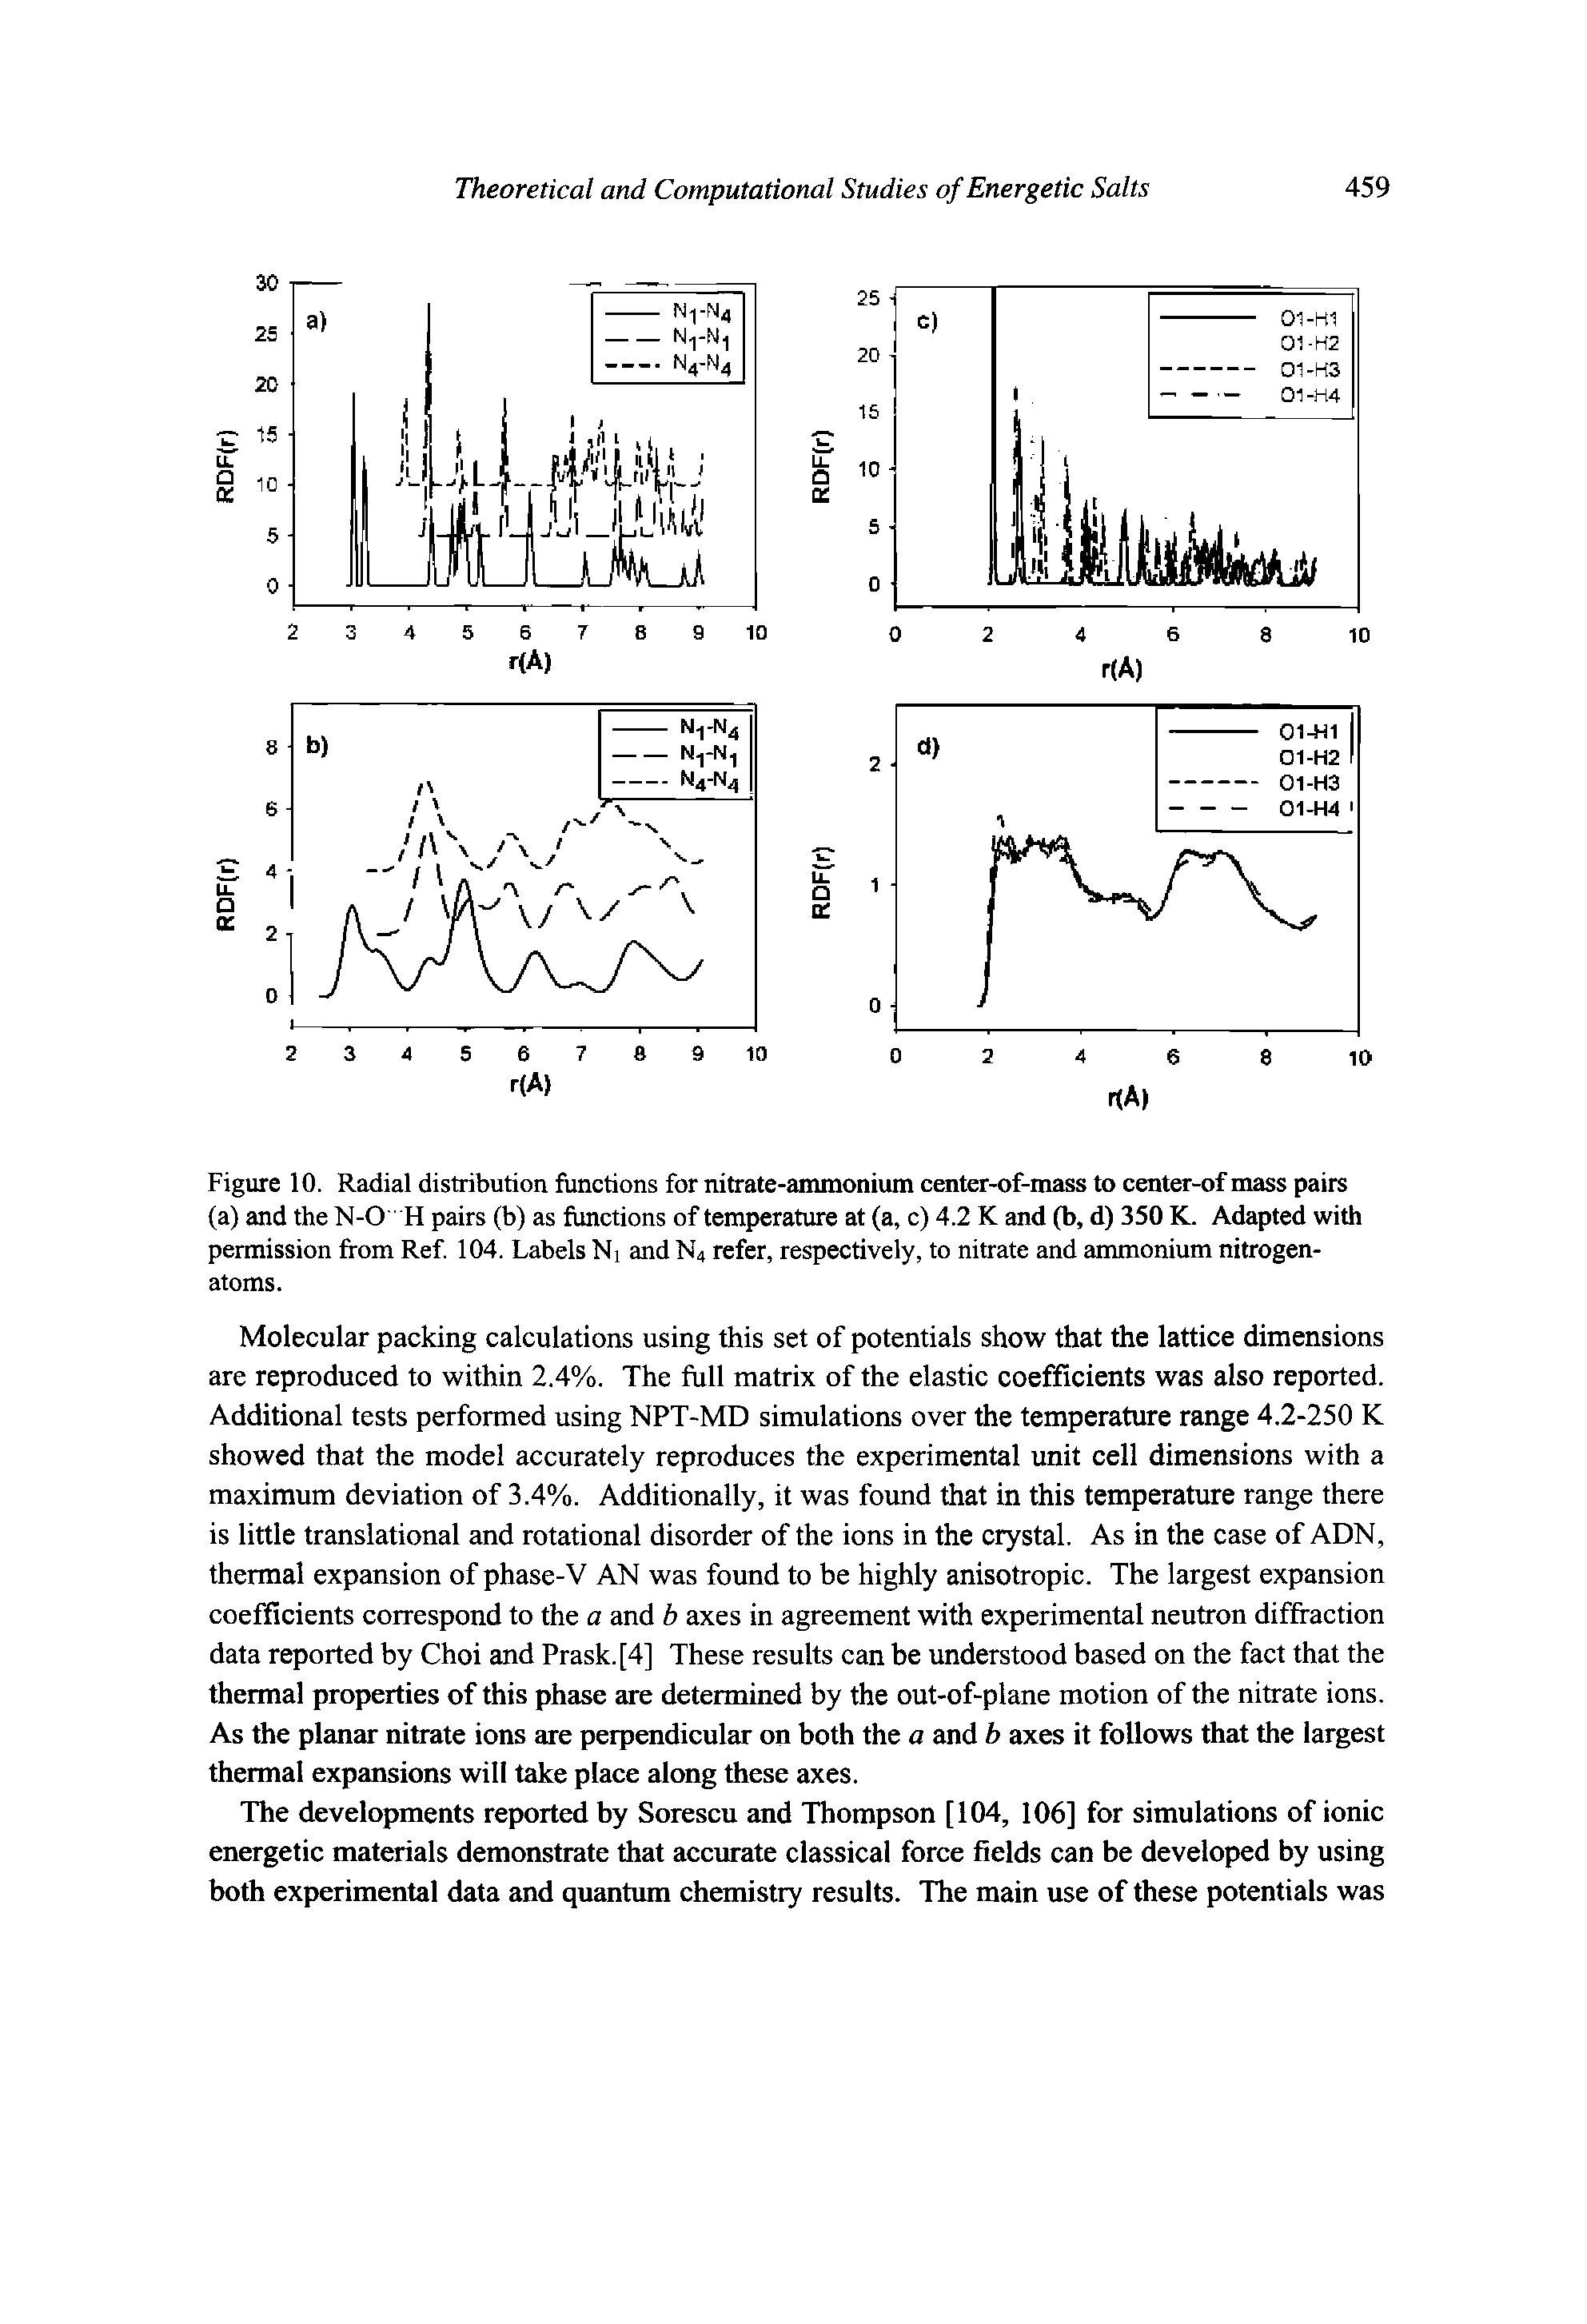 Figure 10. Radial distribution functions for nitrate-ammonium center-of-mass to center-of mass pairs (a) and the N-O H pairs (b) as functions of temperature at (a, c) 4.2 K and (b, d) 350 K. Adapted with permission from Ref 104. Labels Ni and N4 refer, respectively, to nitrate and ammonium nitrogen-atoms.